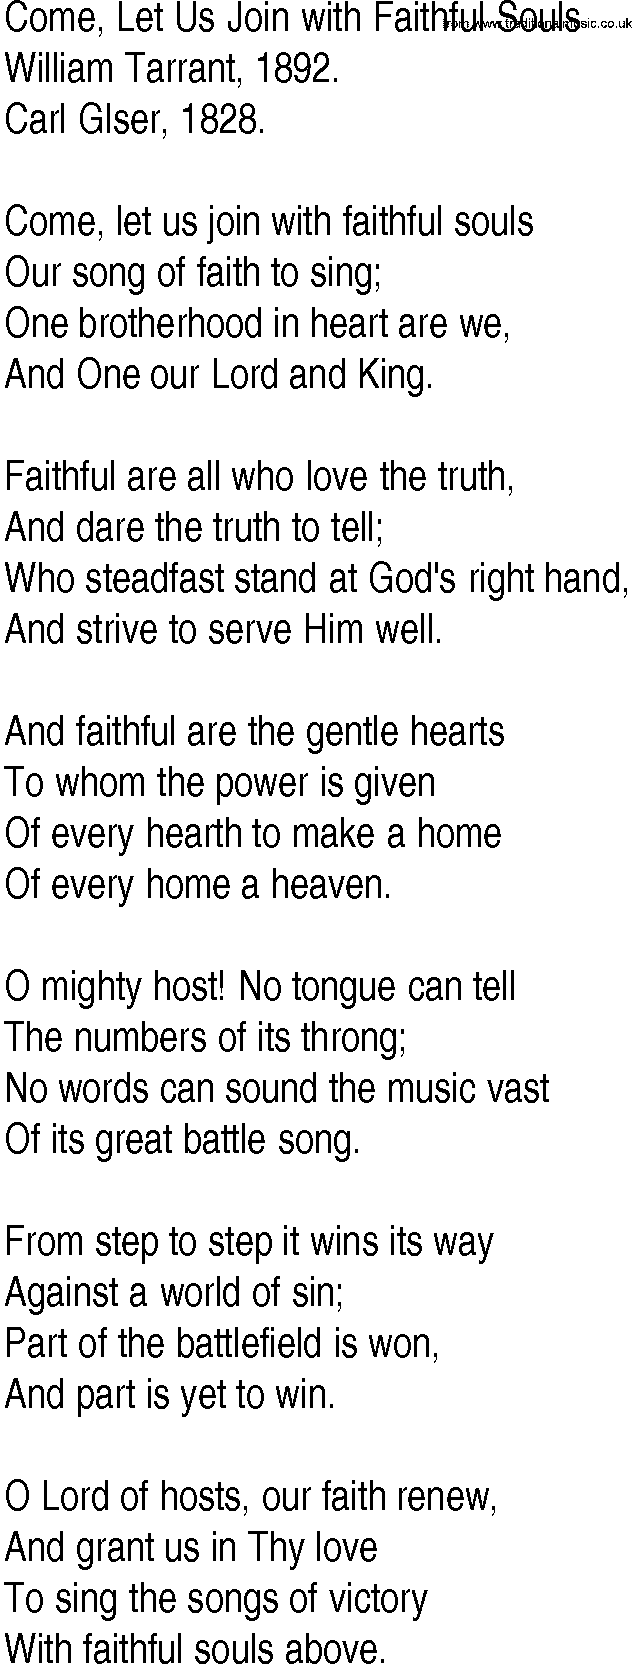 Hymn and Gospel Song: Come, Let Us Join with Faithful Souls by William Tarrant lyrics